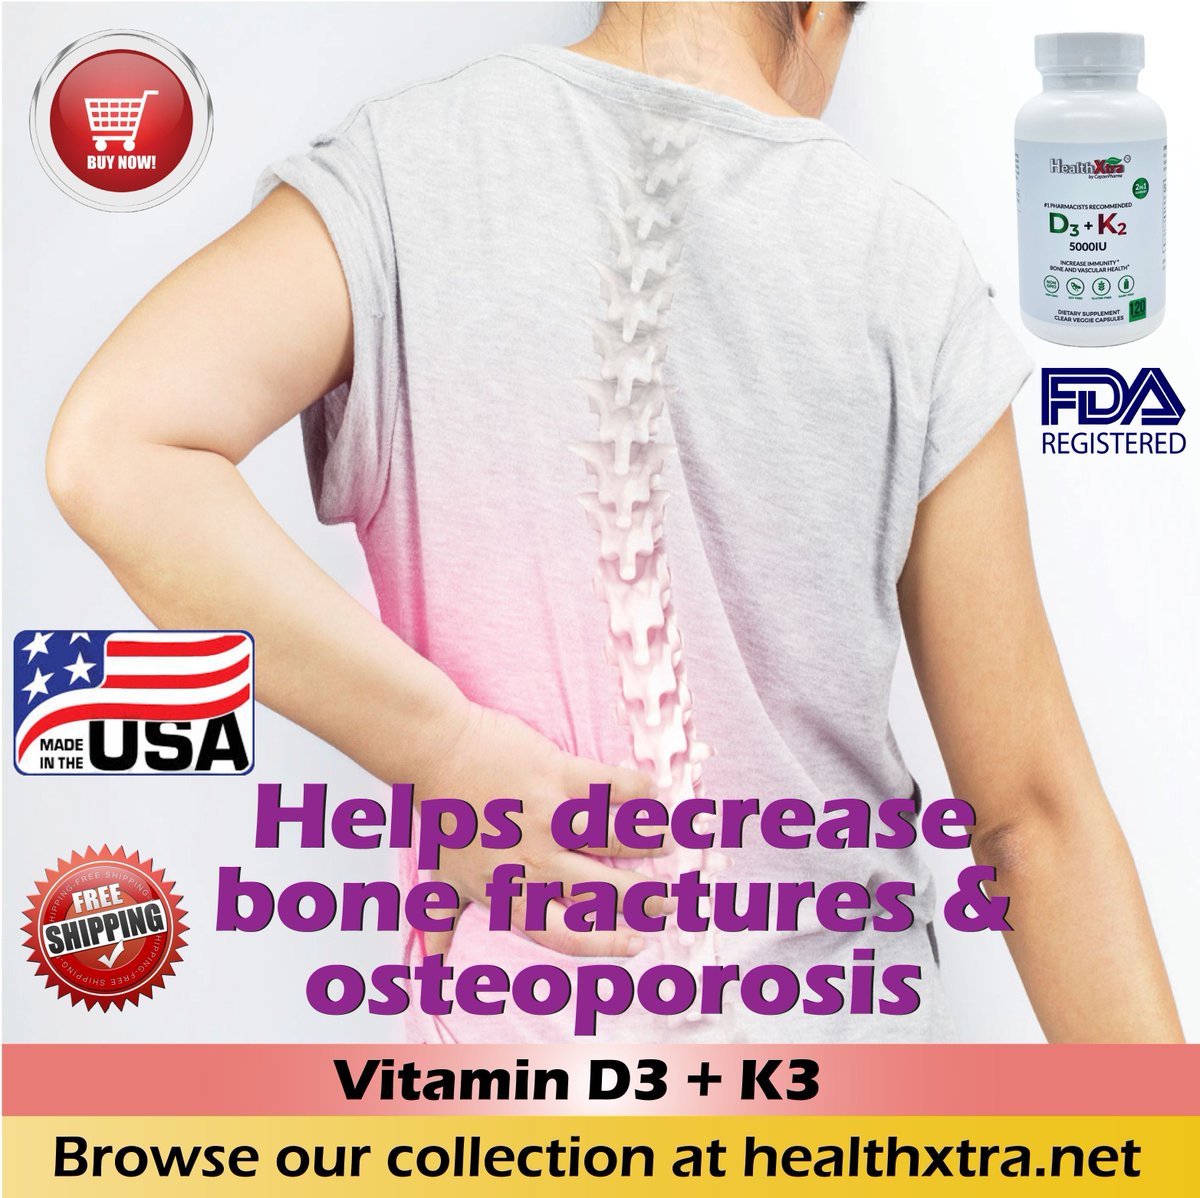 Browse our collection: healthxtra.net
Our products are available on ebay: ebay.com/str/healthxtra…

#vitamind #vitamindeficiency #vitamindeficiences #VitaminK #VitaminK2MK7 #bonehealth #bonejoint #bonepain #bonetreatment #bonetreat #immunityboost #immunitybooster